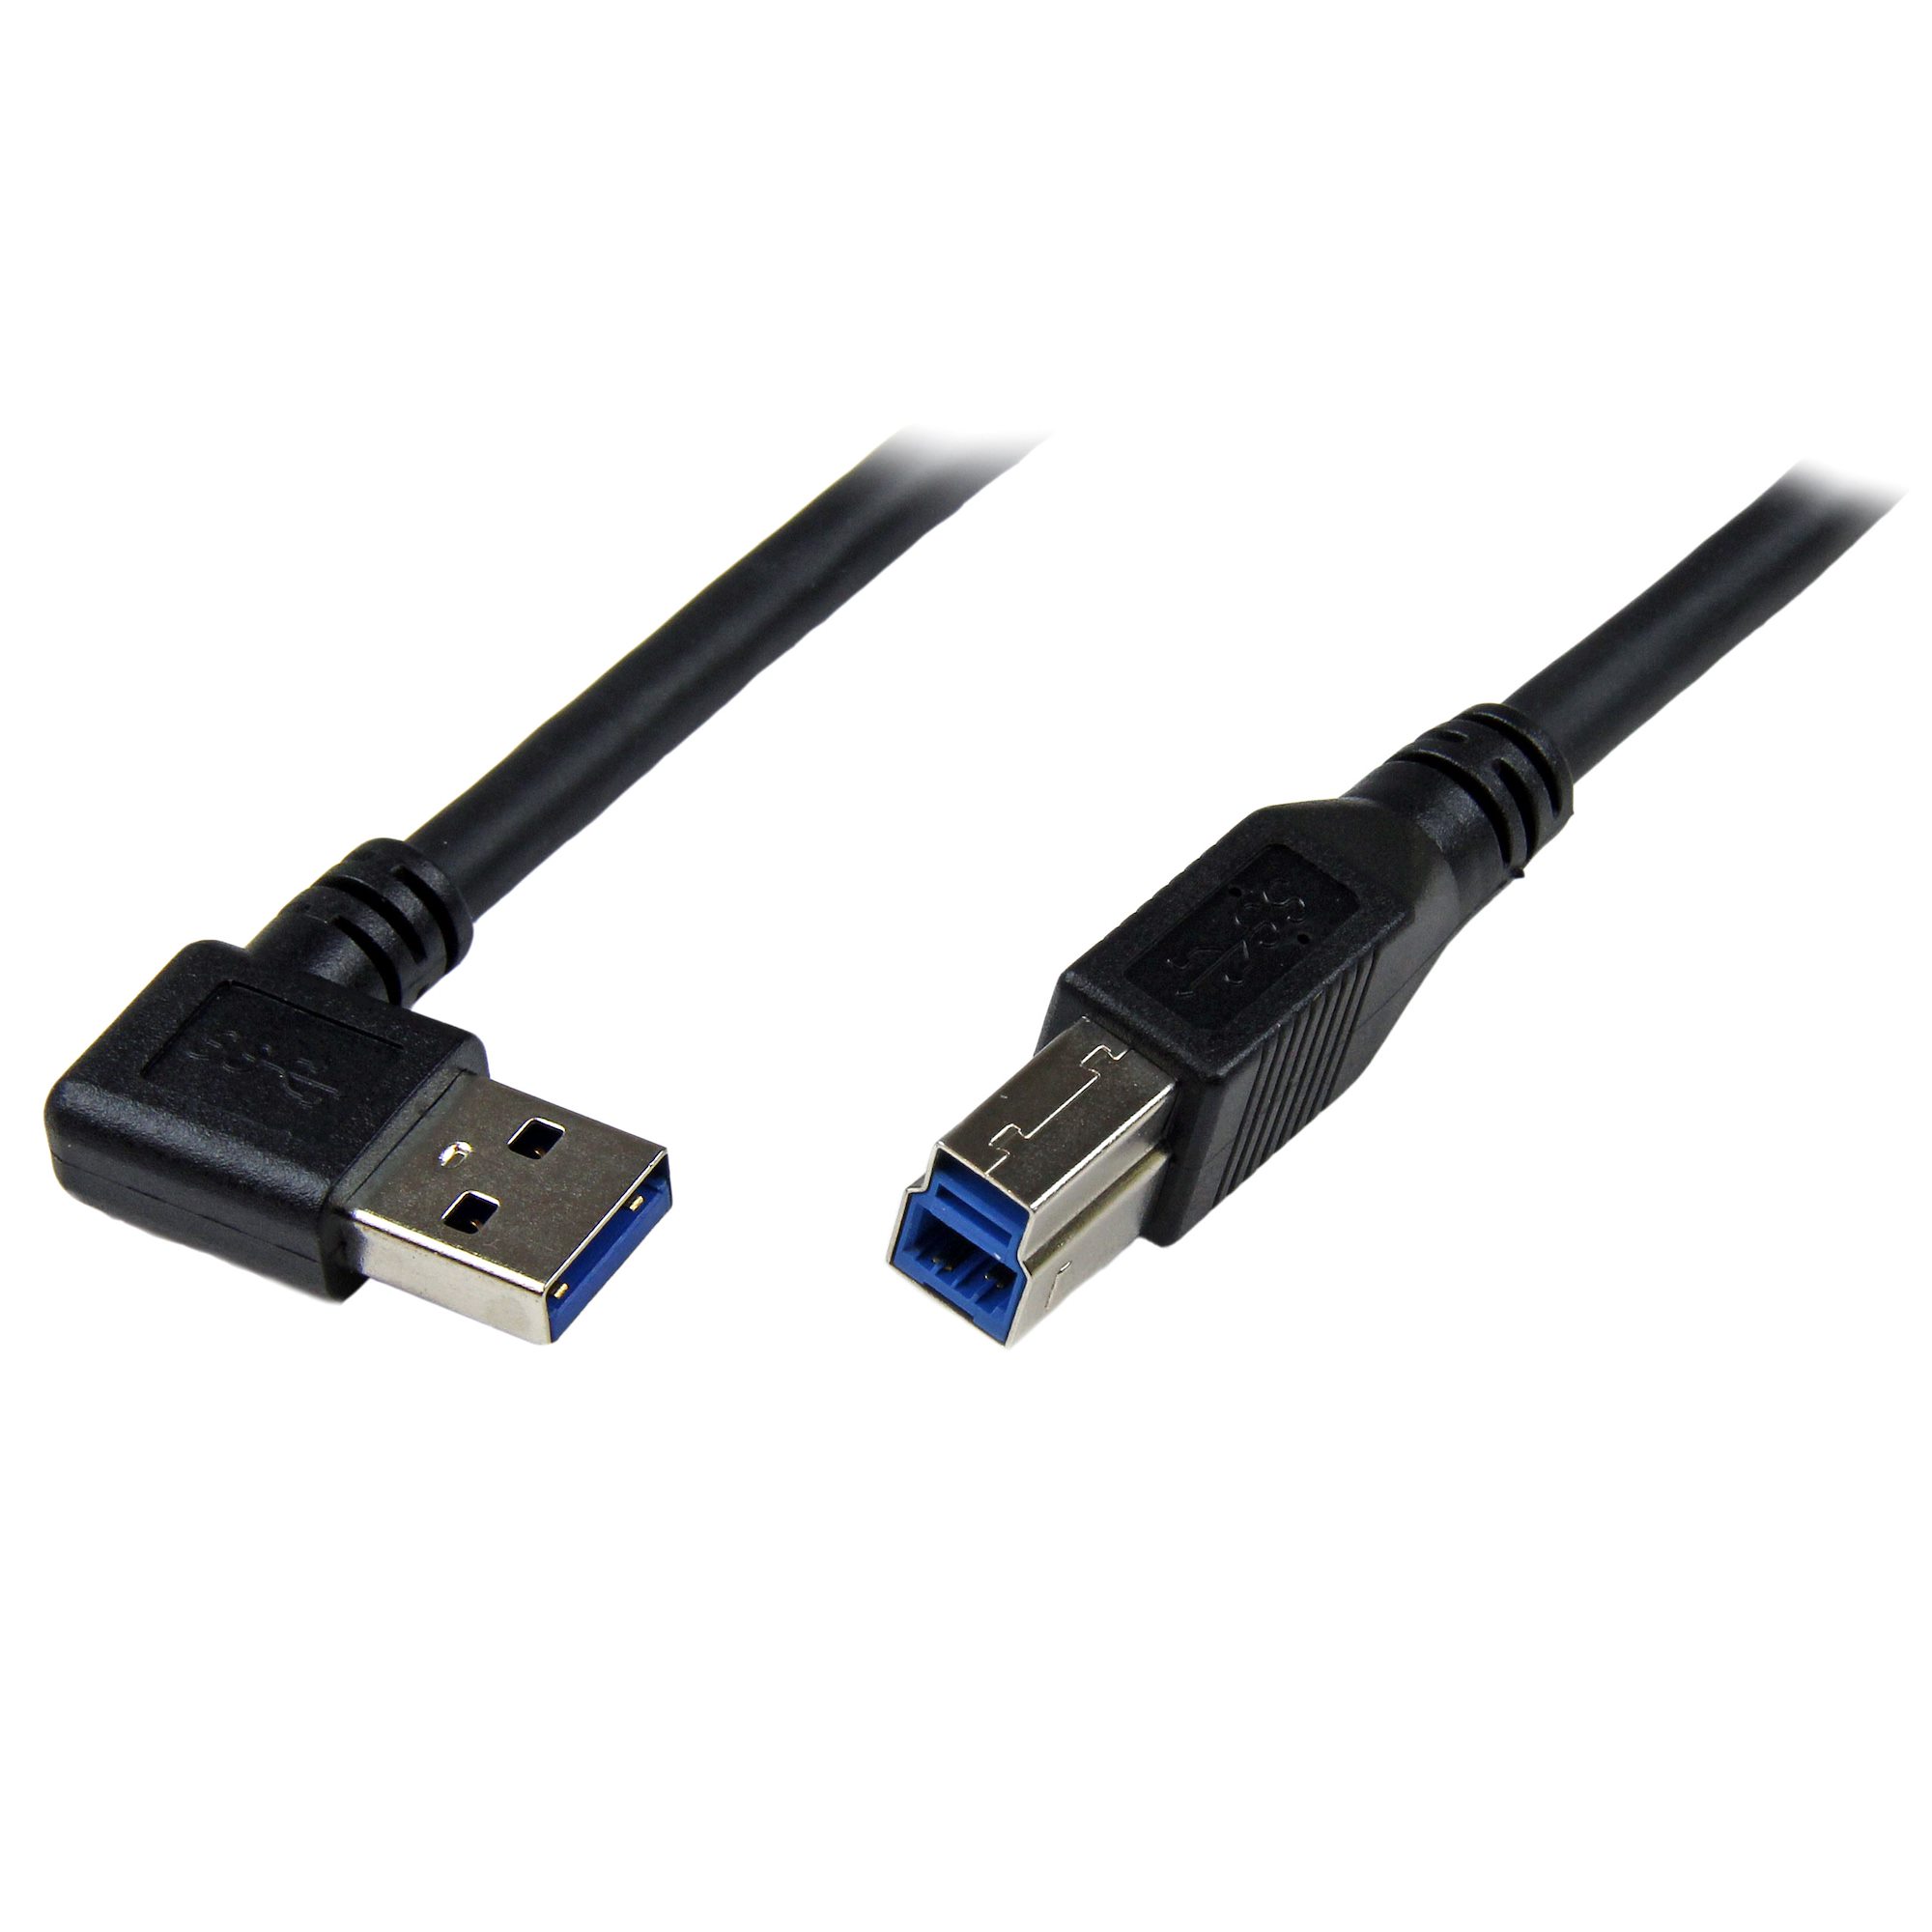 Type A and Type B USB cable